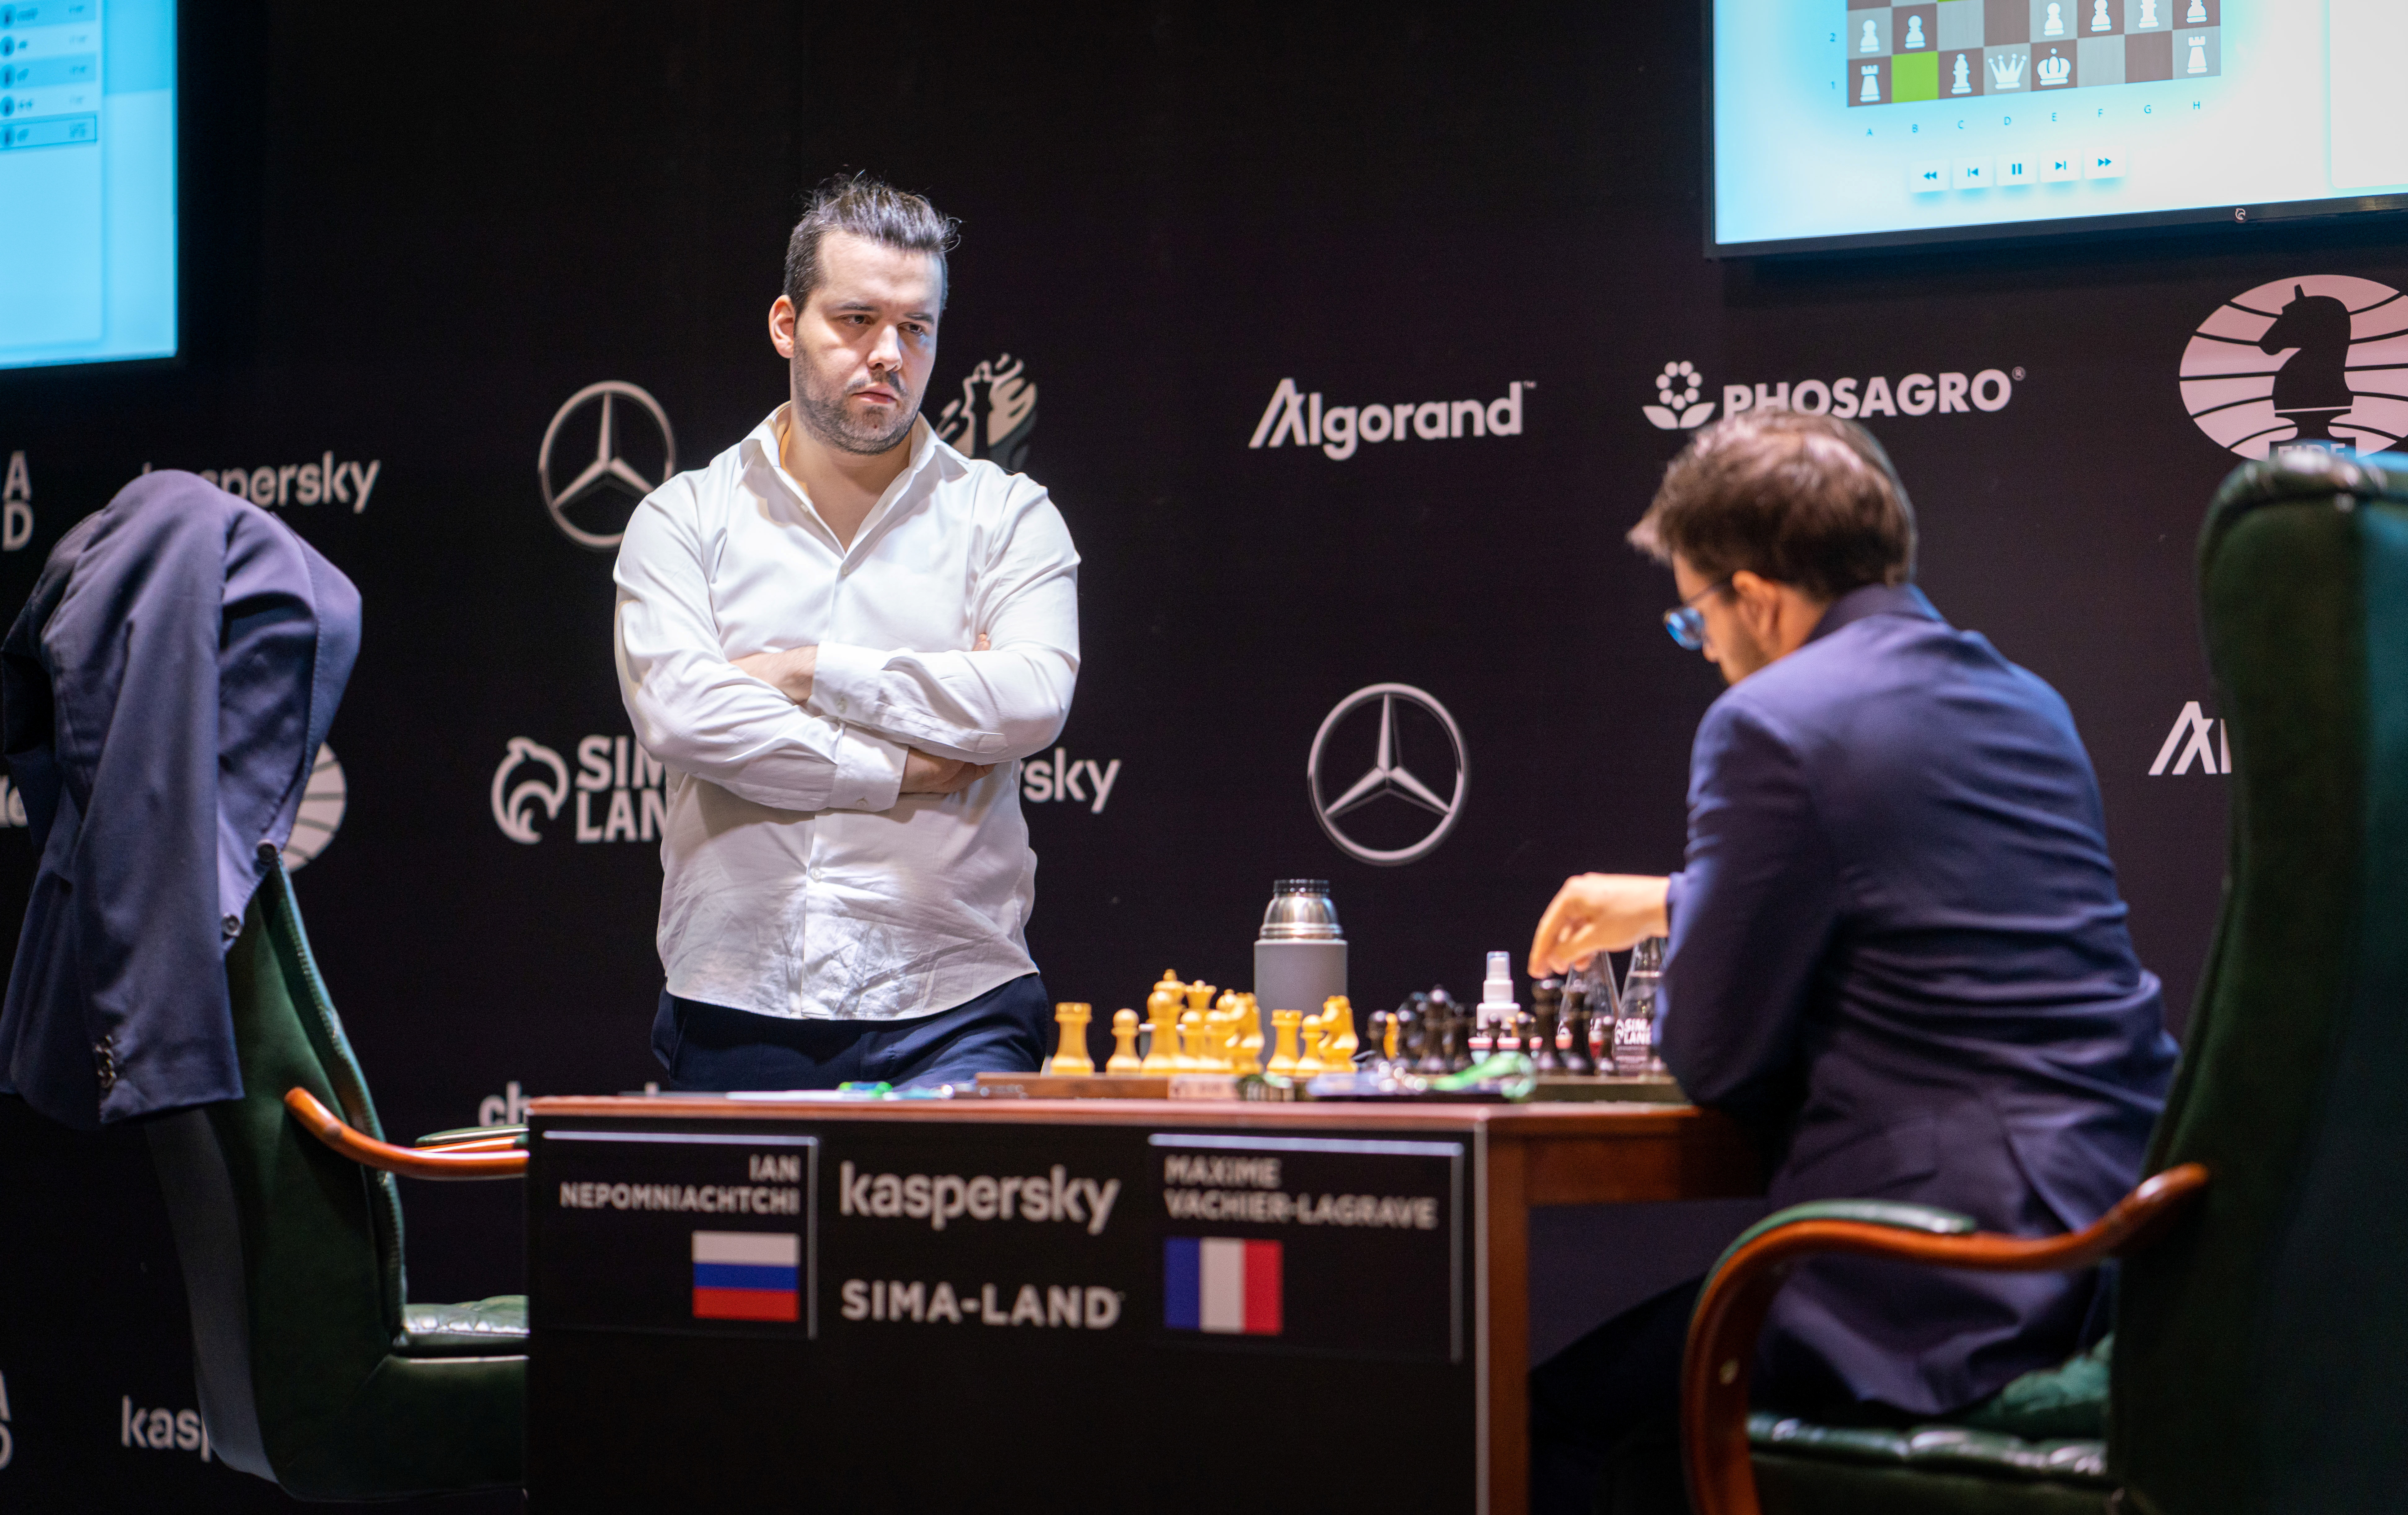 Ian Nepomniachtchi Takes the Lead in FIDE Candidates Tournament